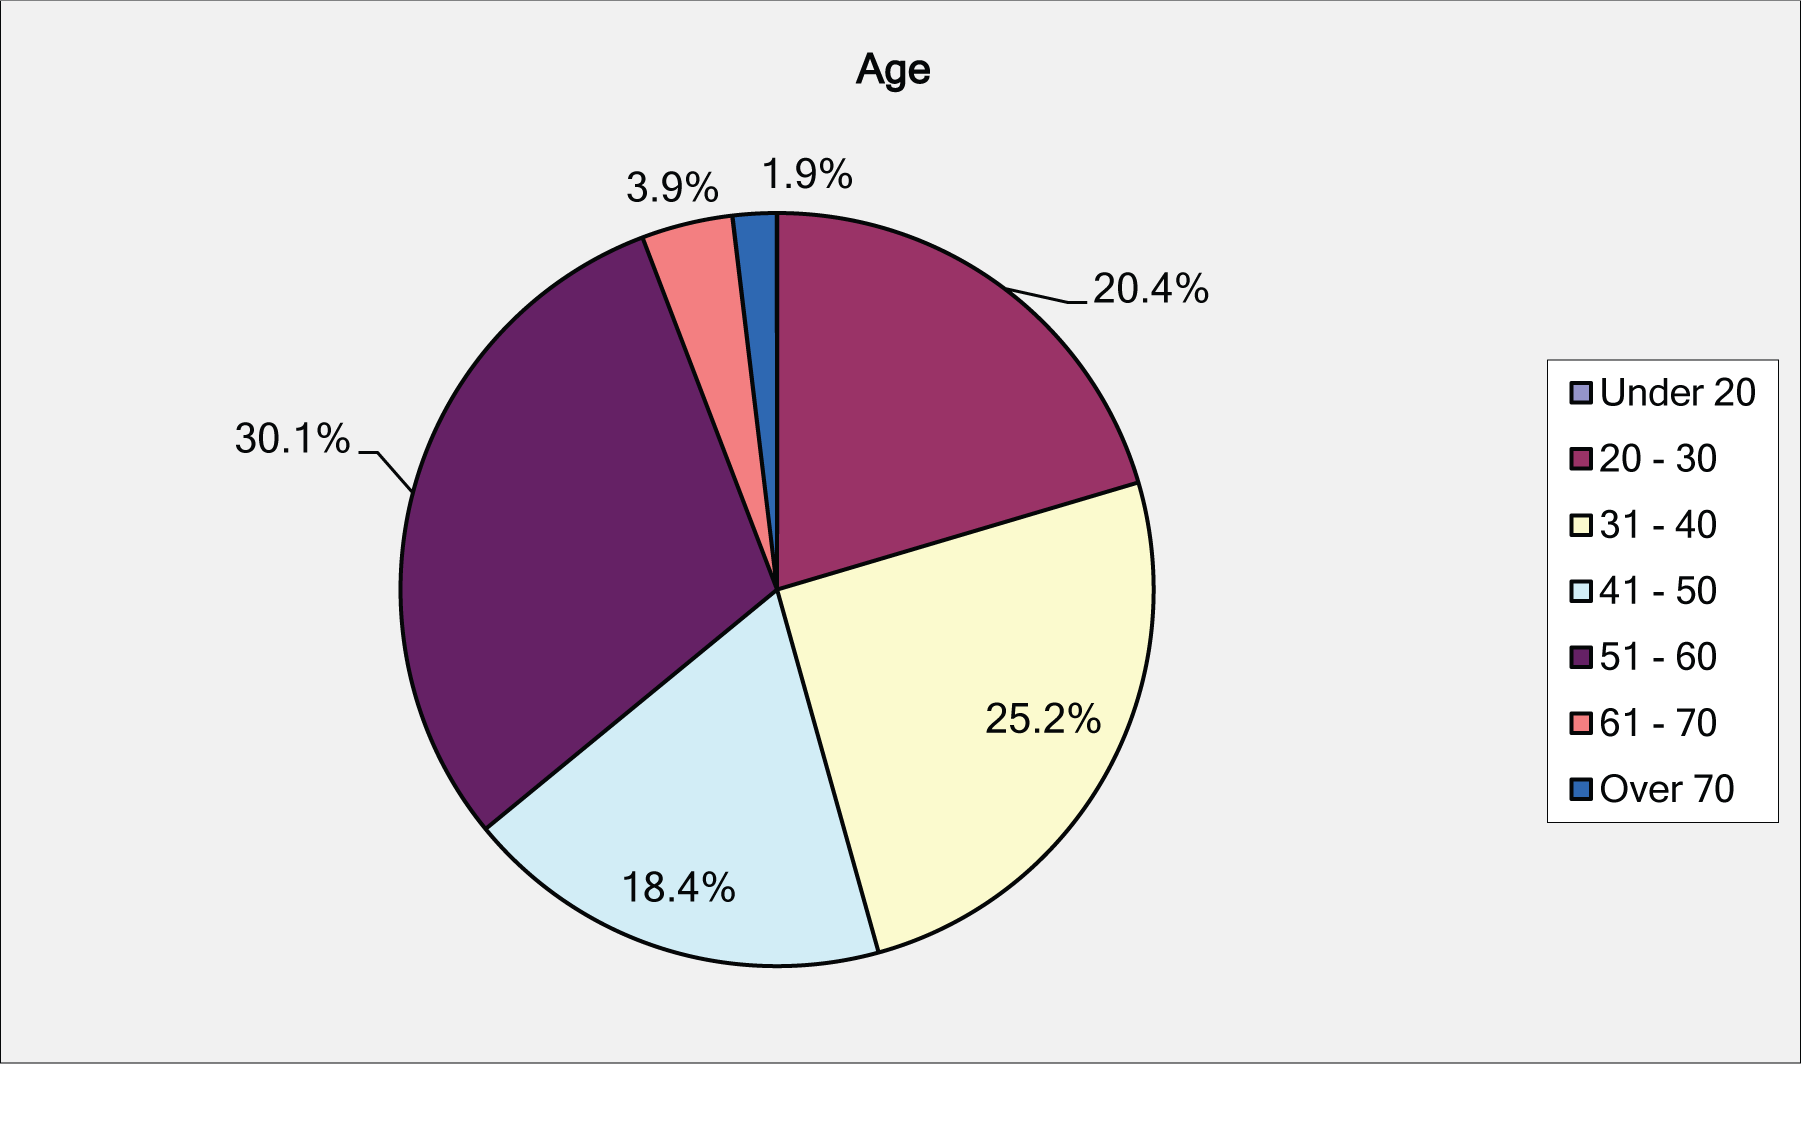  Figure 1. Percentage of CoMT respondents by age bracket.